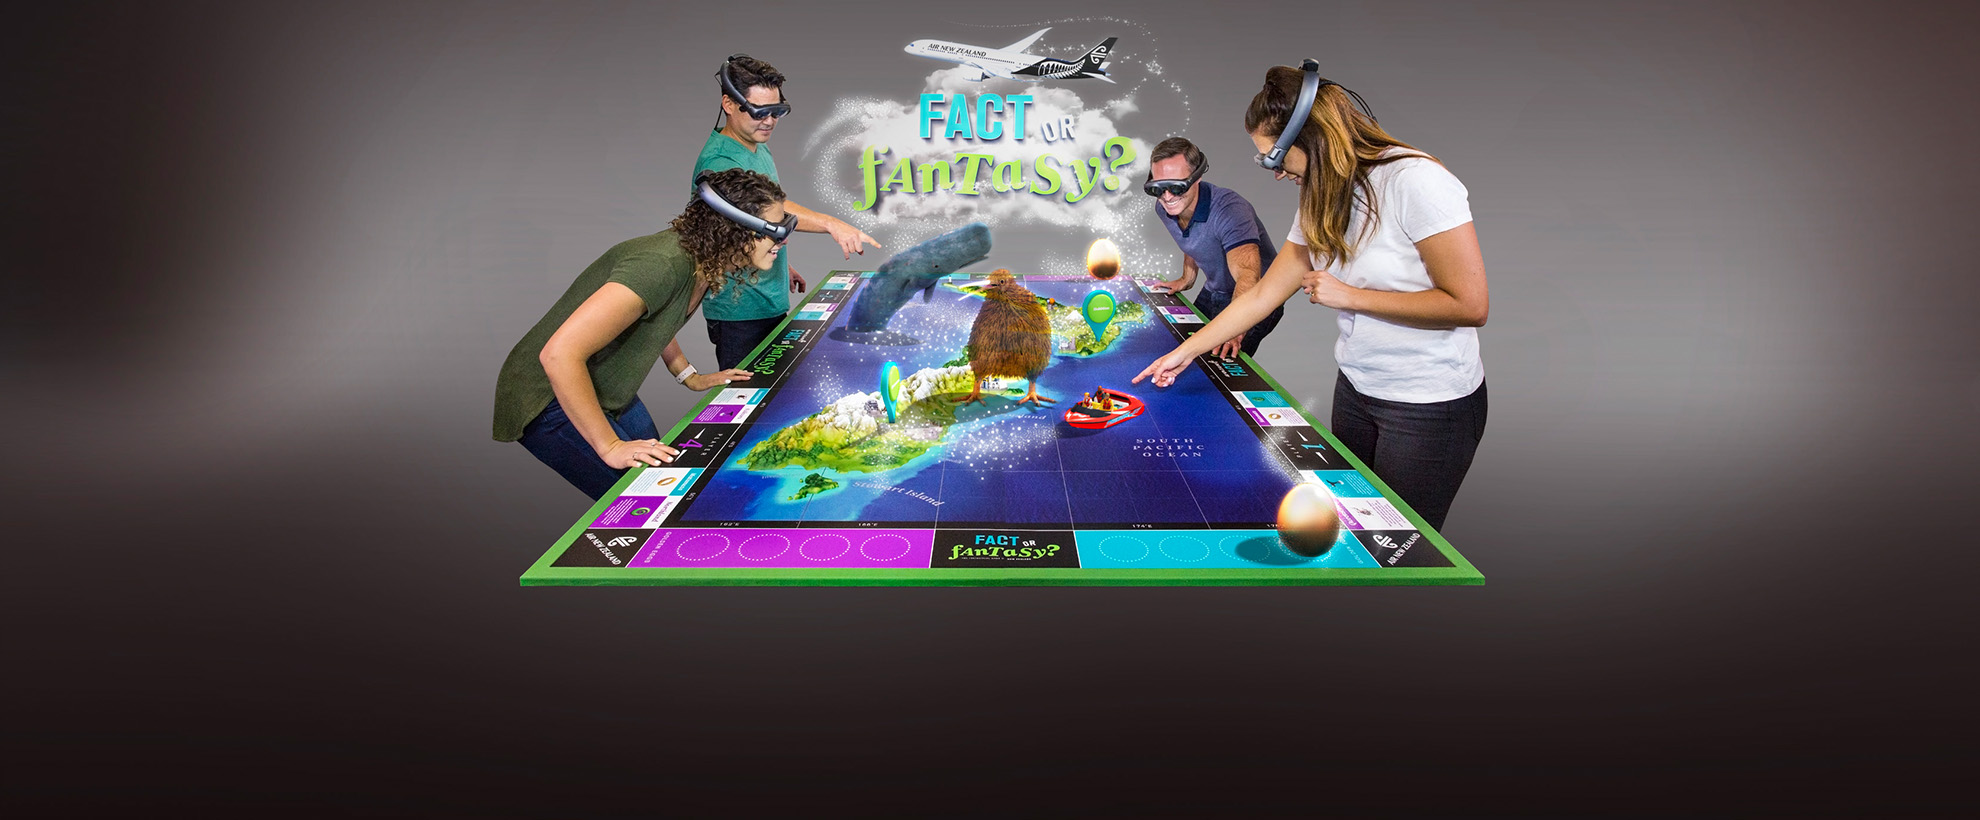 Two men and two women wearing VR goggles stand around a giant virtual board game that features the map of New Zealand 